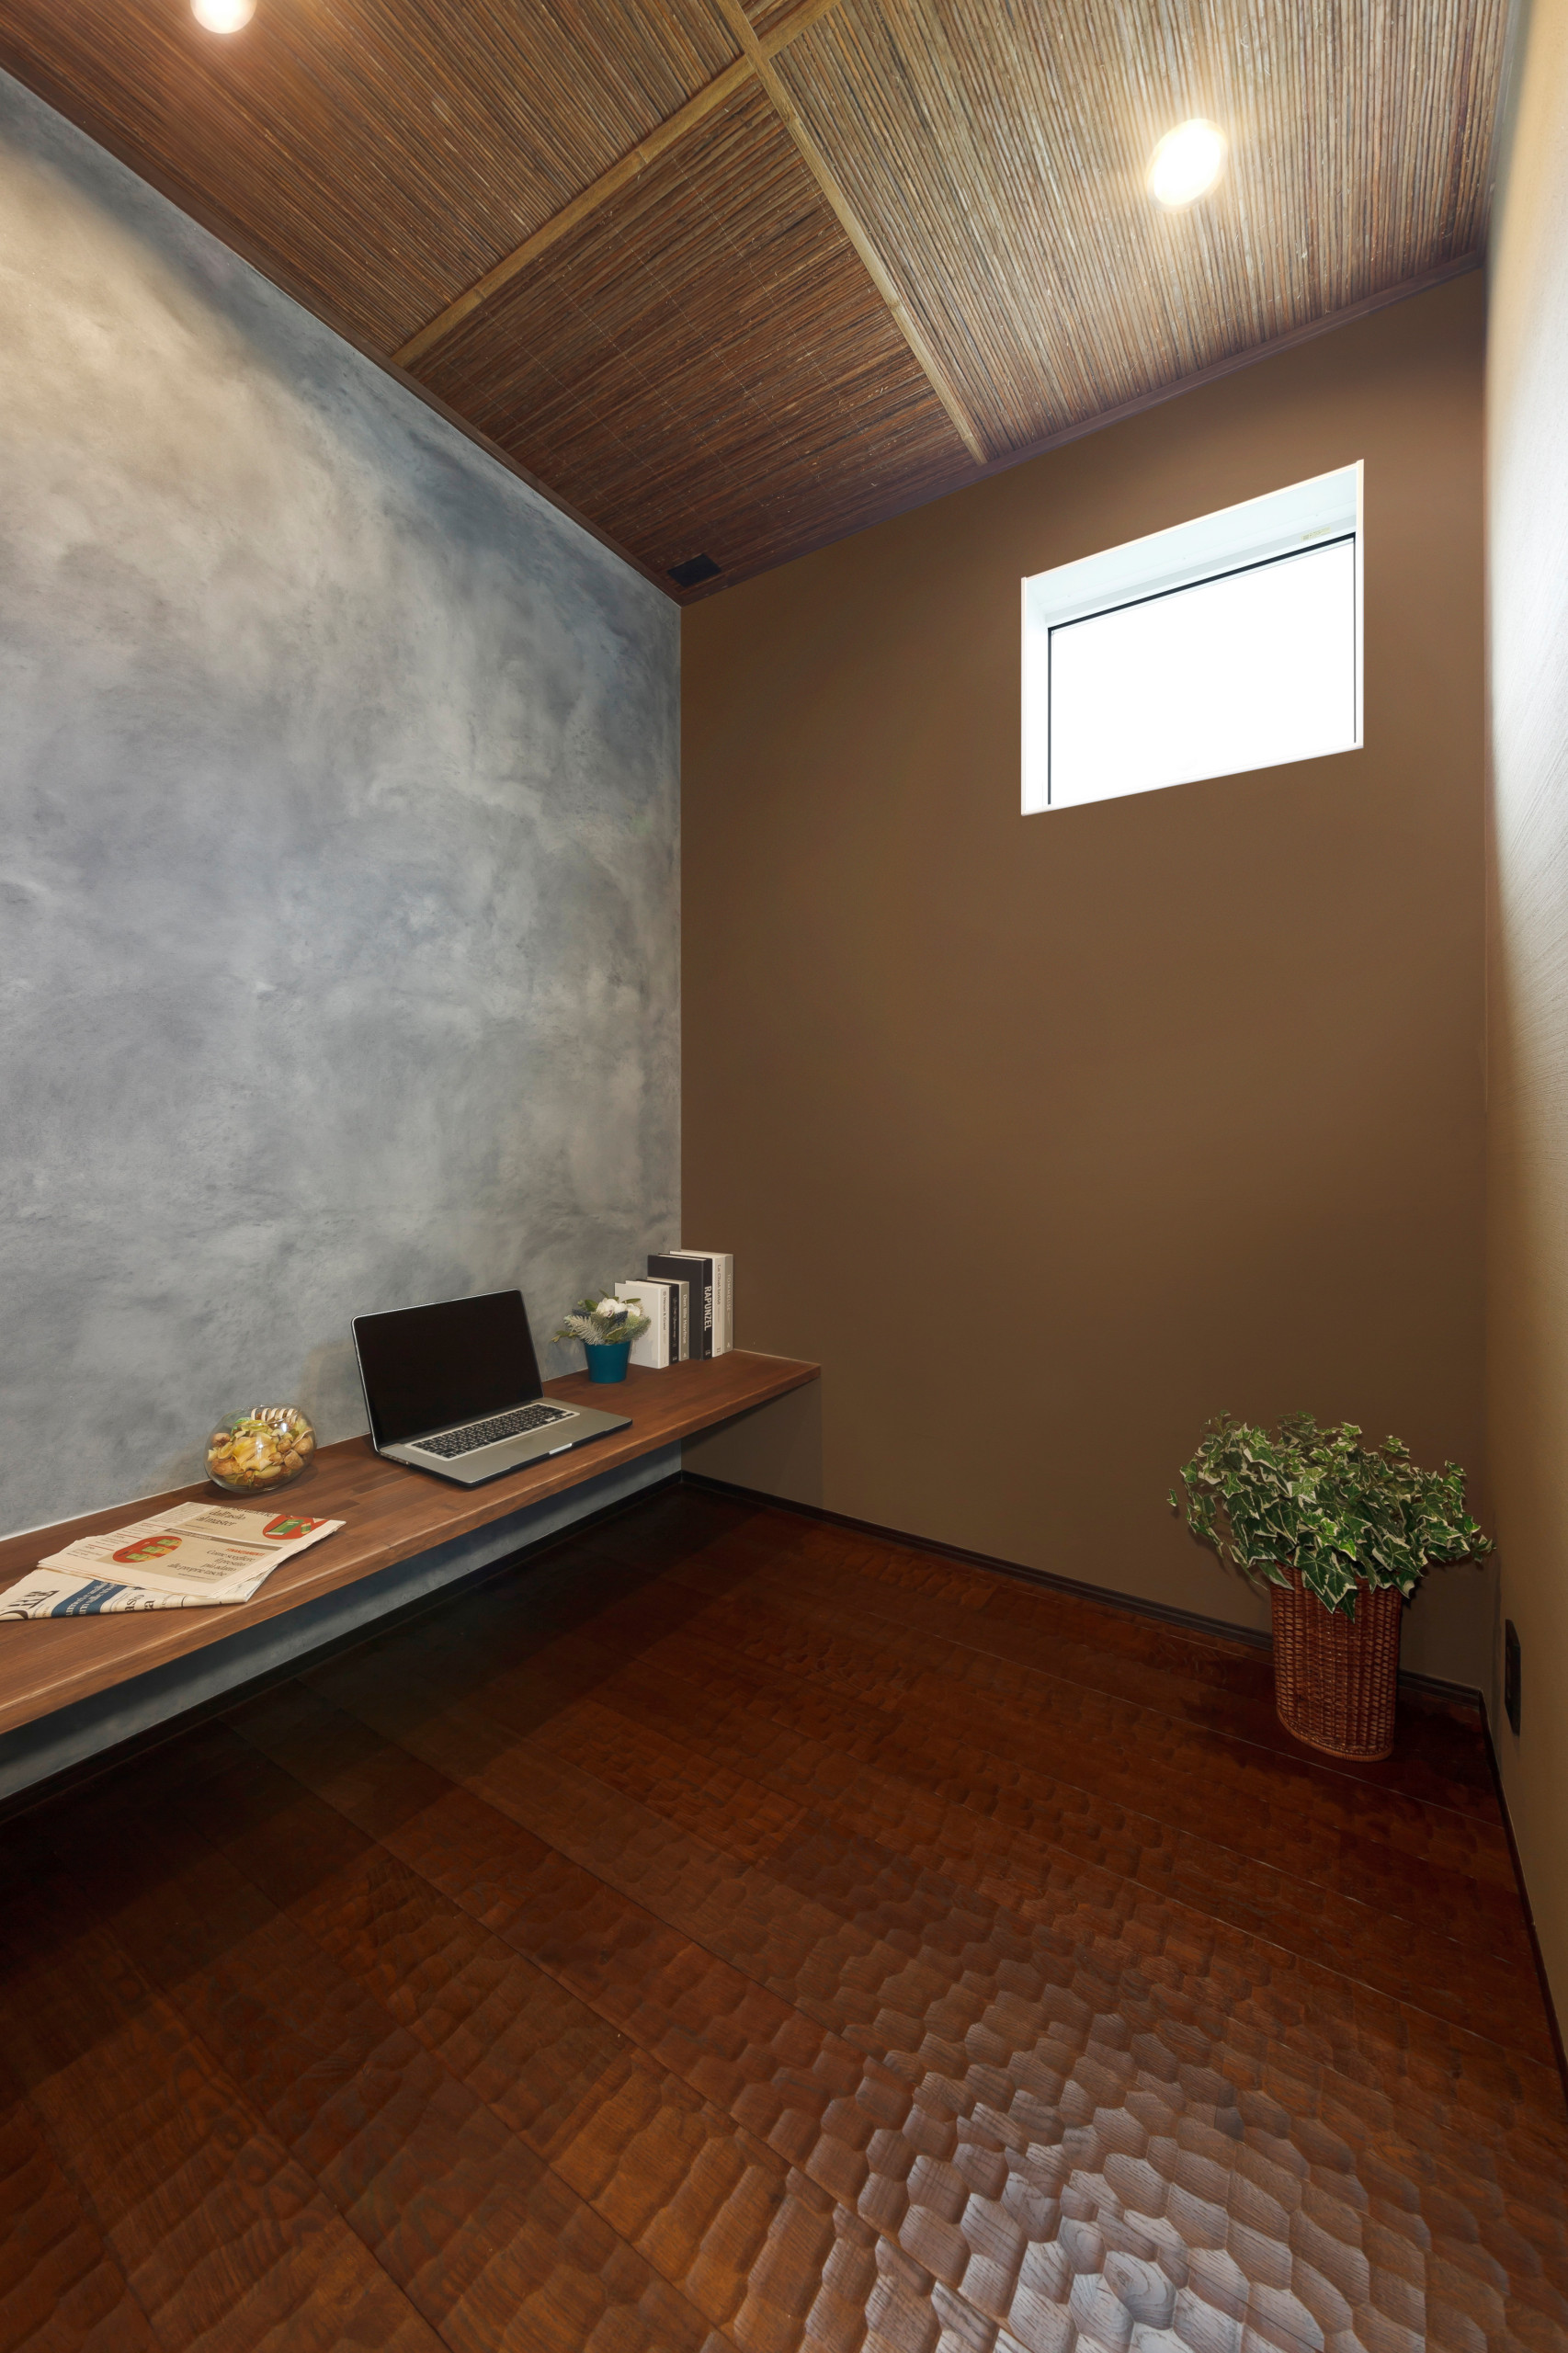 75 Beautiful Wood Ceiling Study Room Pictures Ideas March 21 Houzz